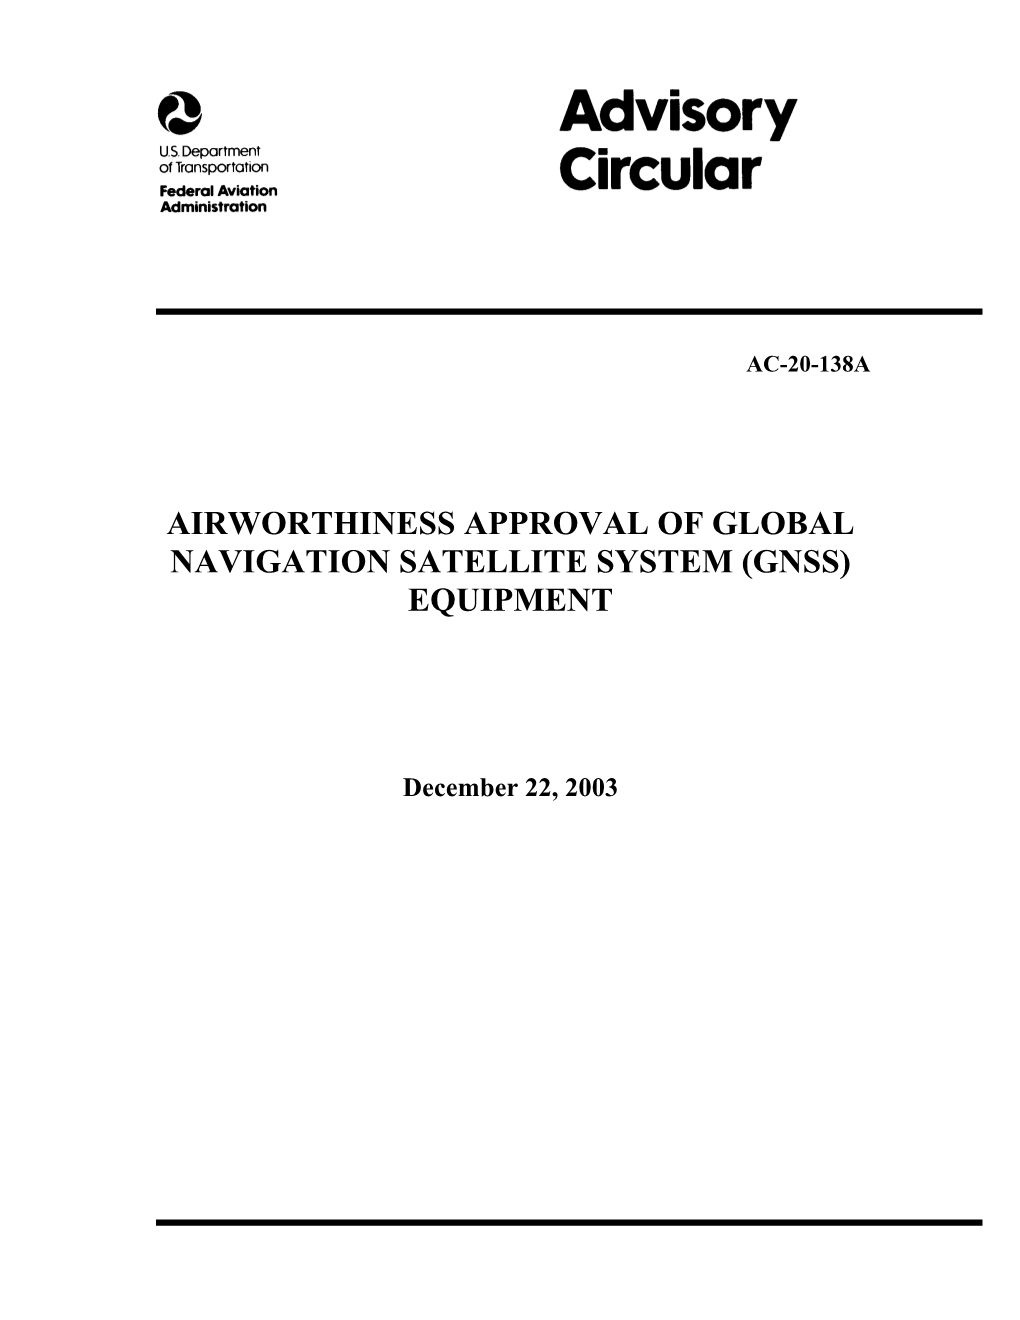 Airworthiness Approval of Global Navigation Satellite System (Gnss) Equipment